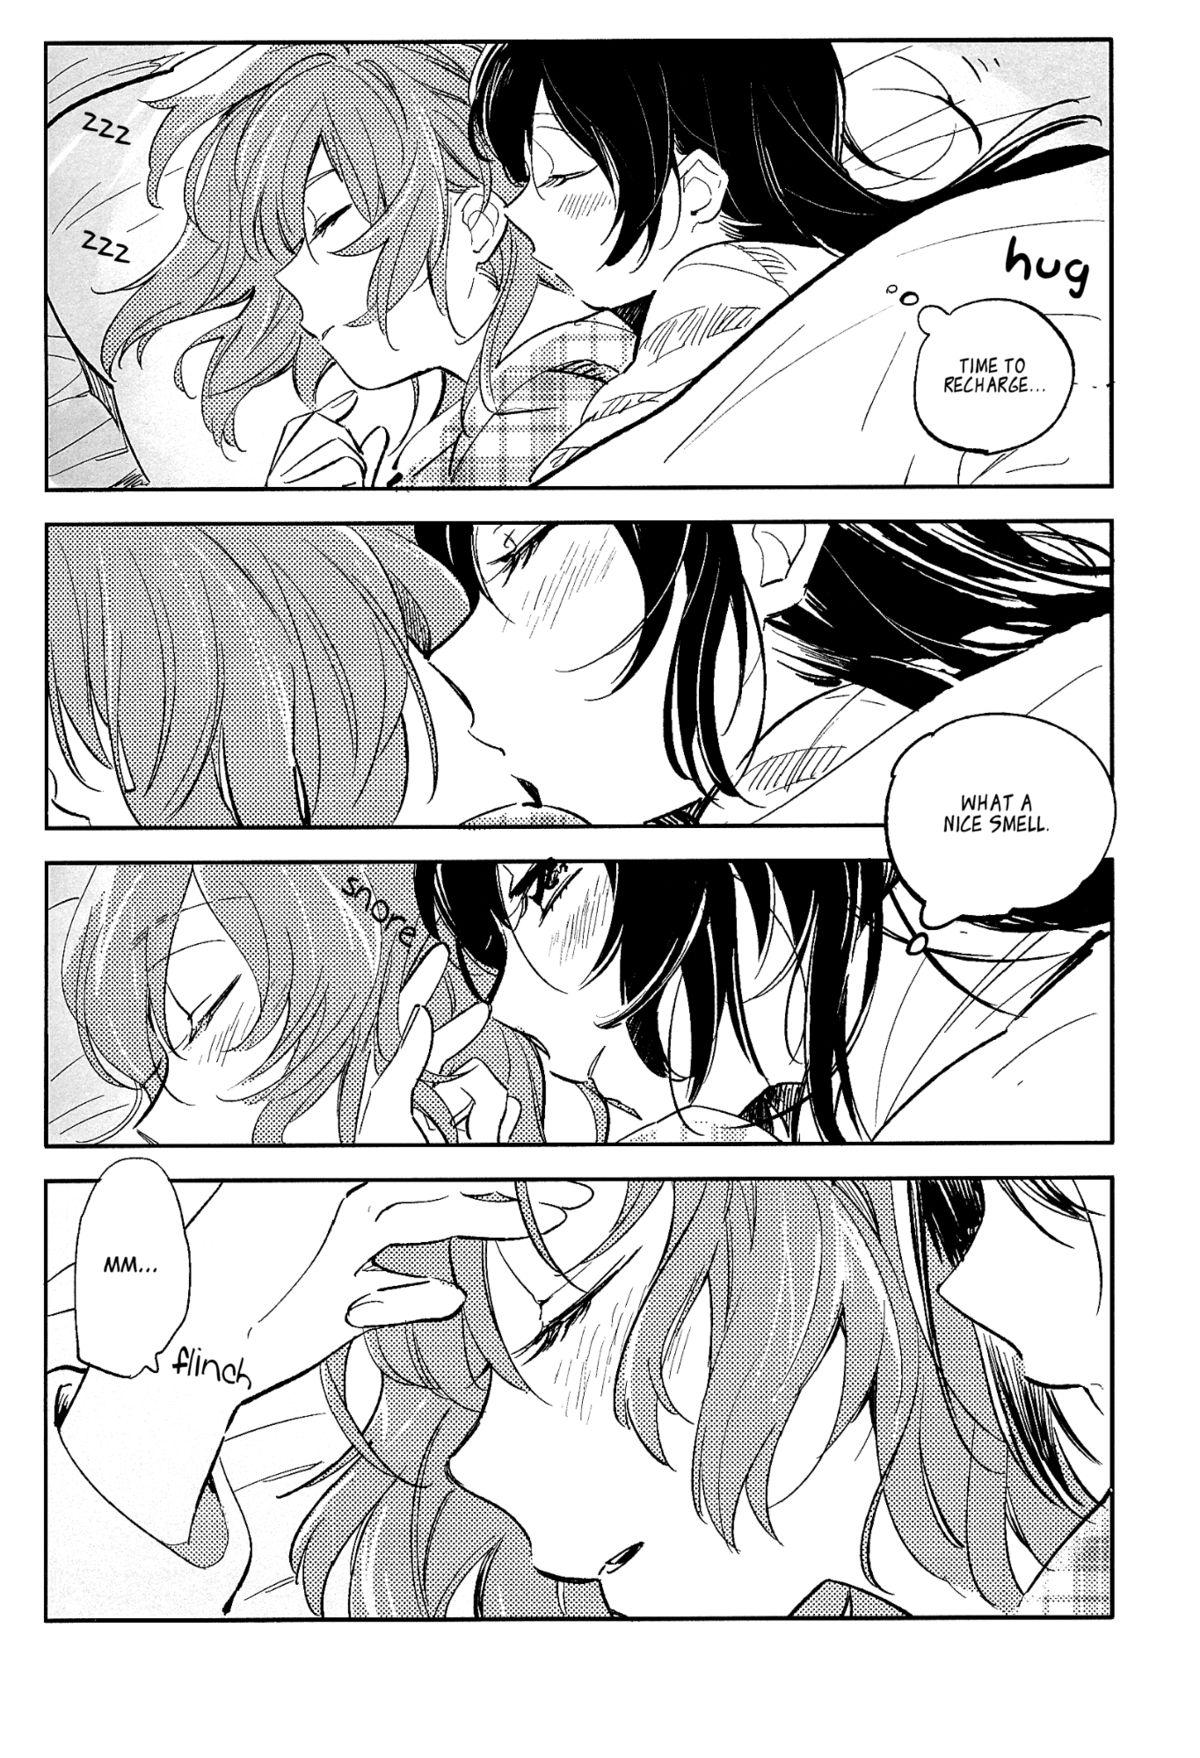 Alone Koibito no Jikan | Time for Lovers - Love live Amateur Sex - Page 6